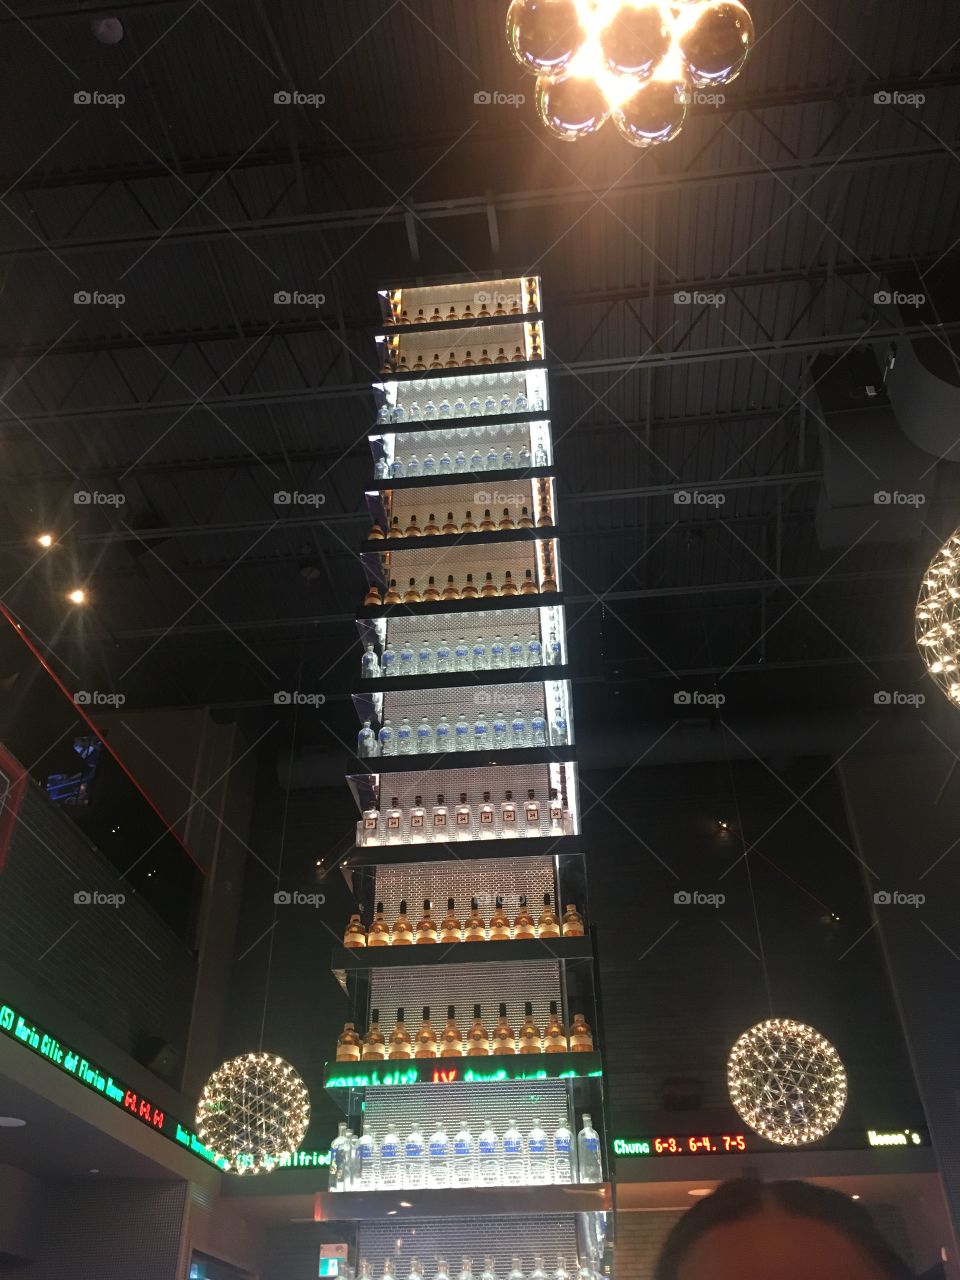 The largest tower of booze you will ever see found right in the heart of the restaurant.